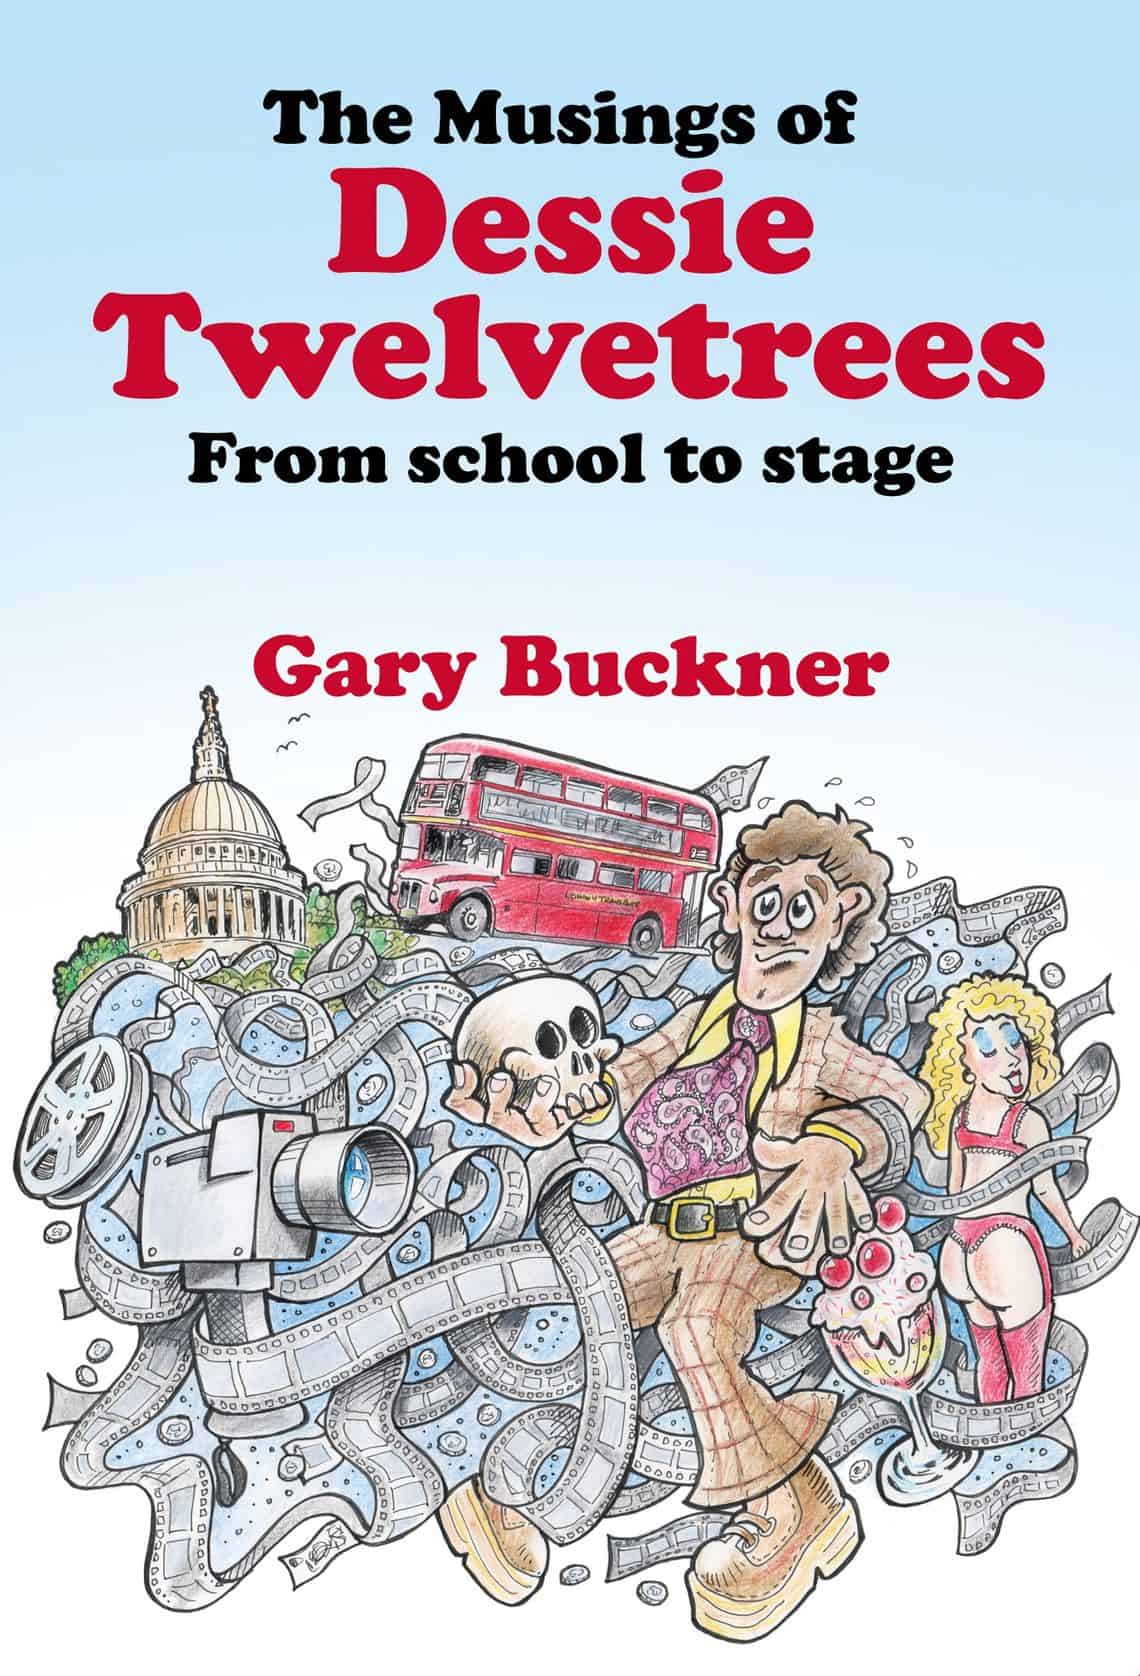 The Musings of Dessie Twelvetrees: from school to stage.